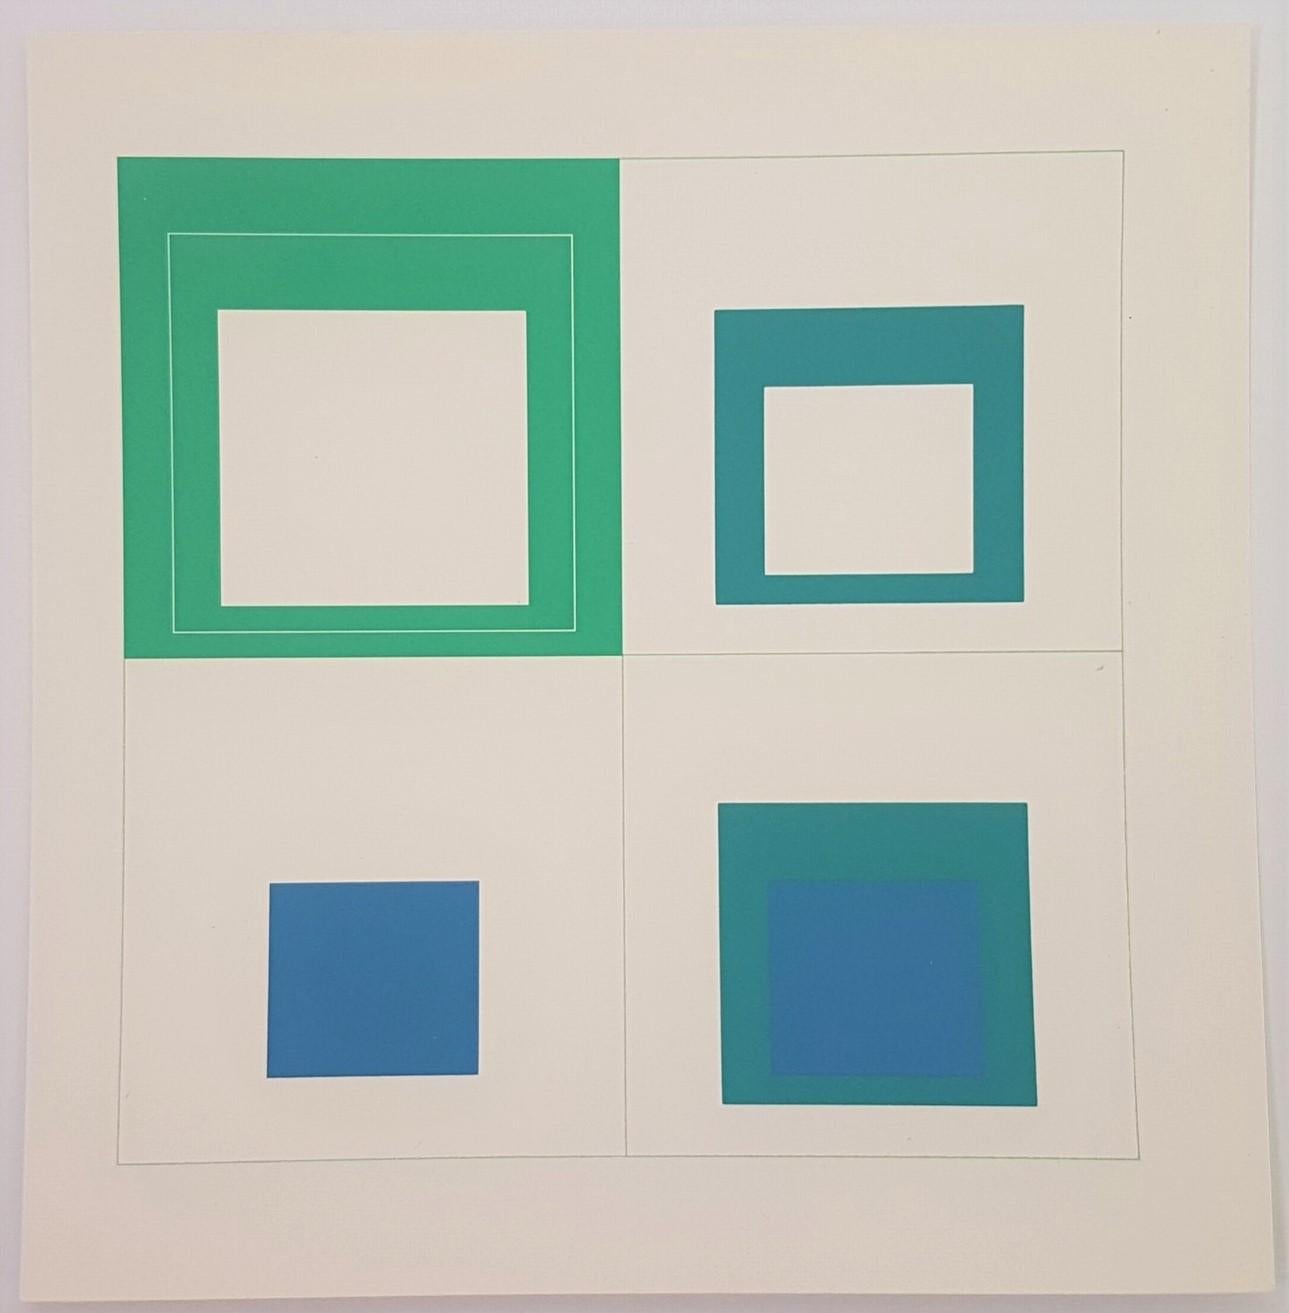 (after) Josef Albers Abstract Print – Quadrate mit weißen Linien (Bauhaus, Minimalist, Homage to the Square - 50% OFF)